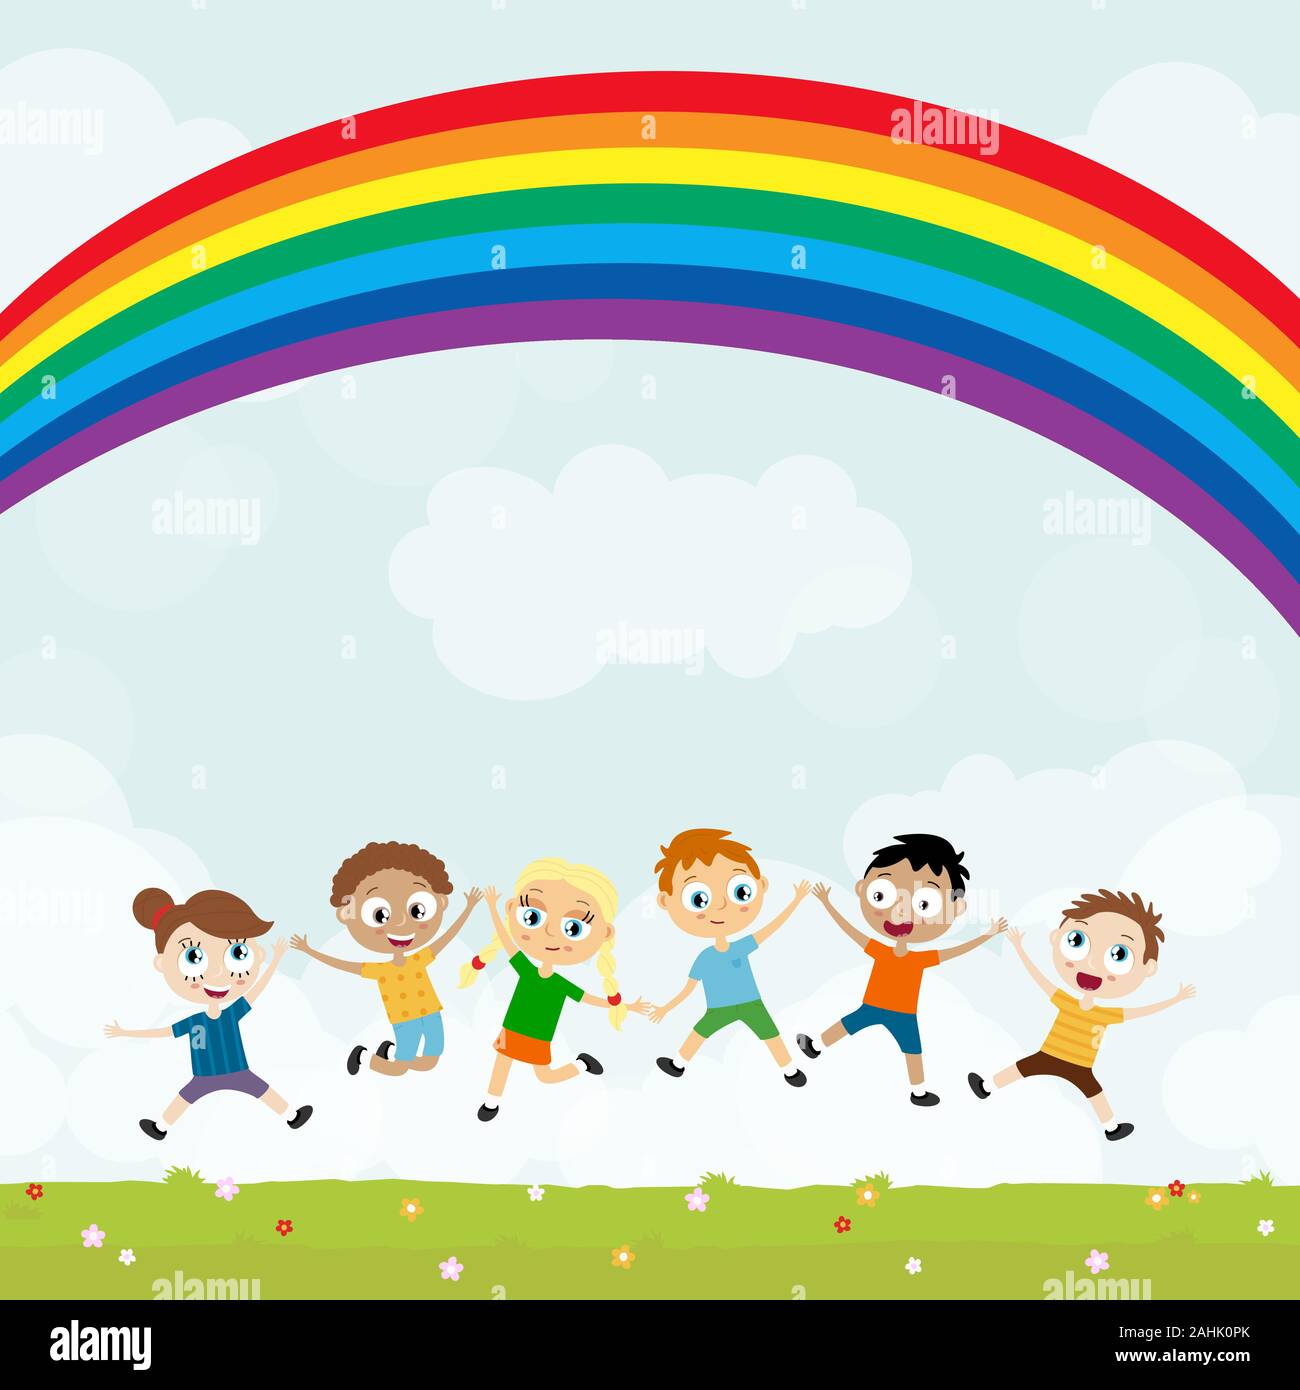 EPS10 vector file showing happy young kids with different skin colors, boys and girls laughing, hopping, playing and having fun together in front of s Stock Vector